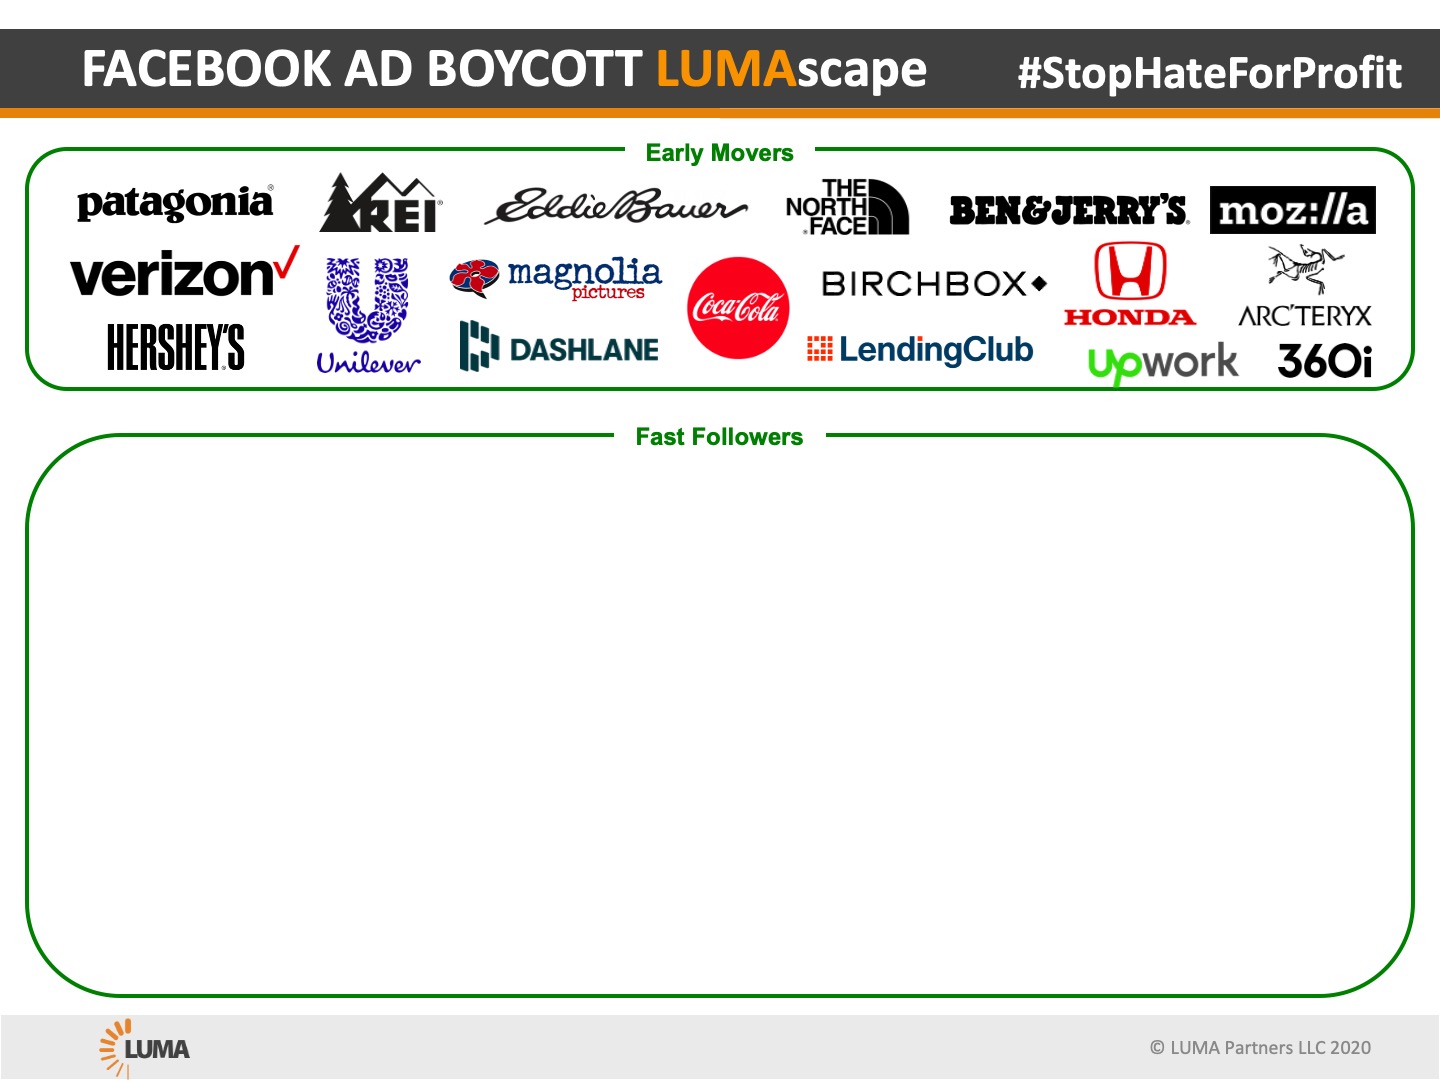 Terence Kawaja Introducing The Facebook Ad Boycott Lumascape For Responsible Brands To Demonstrate That Their Purpose Statements Are More Than Just Virtue Signaling Stophateforprofit T Co Iofrstmf9o